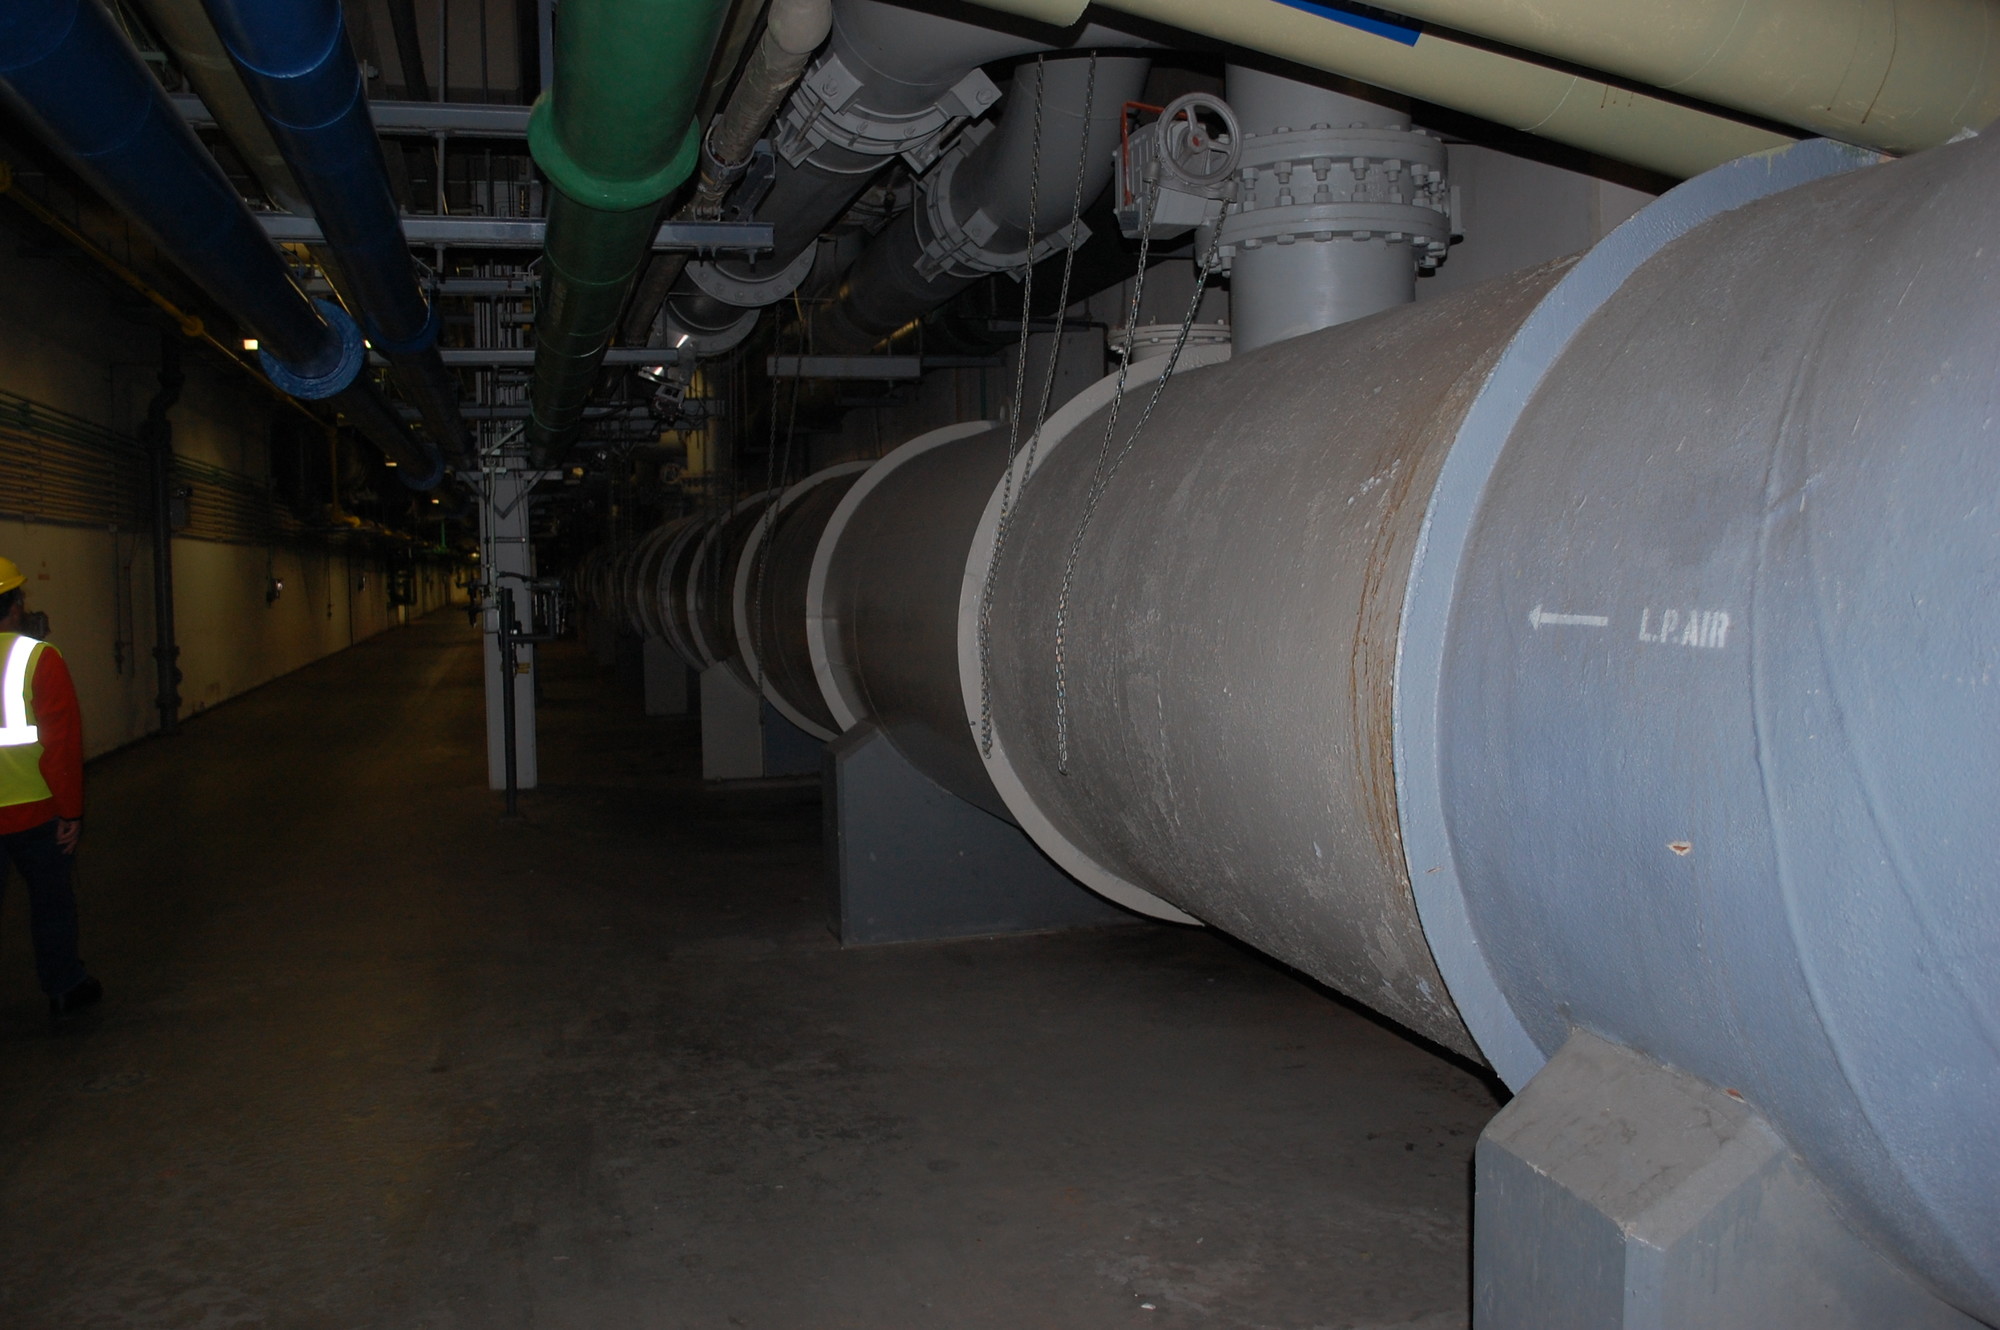 Large pipes provide aeration that keeps alive microorganisms which are used to break down the sewage.